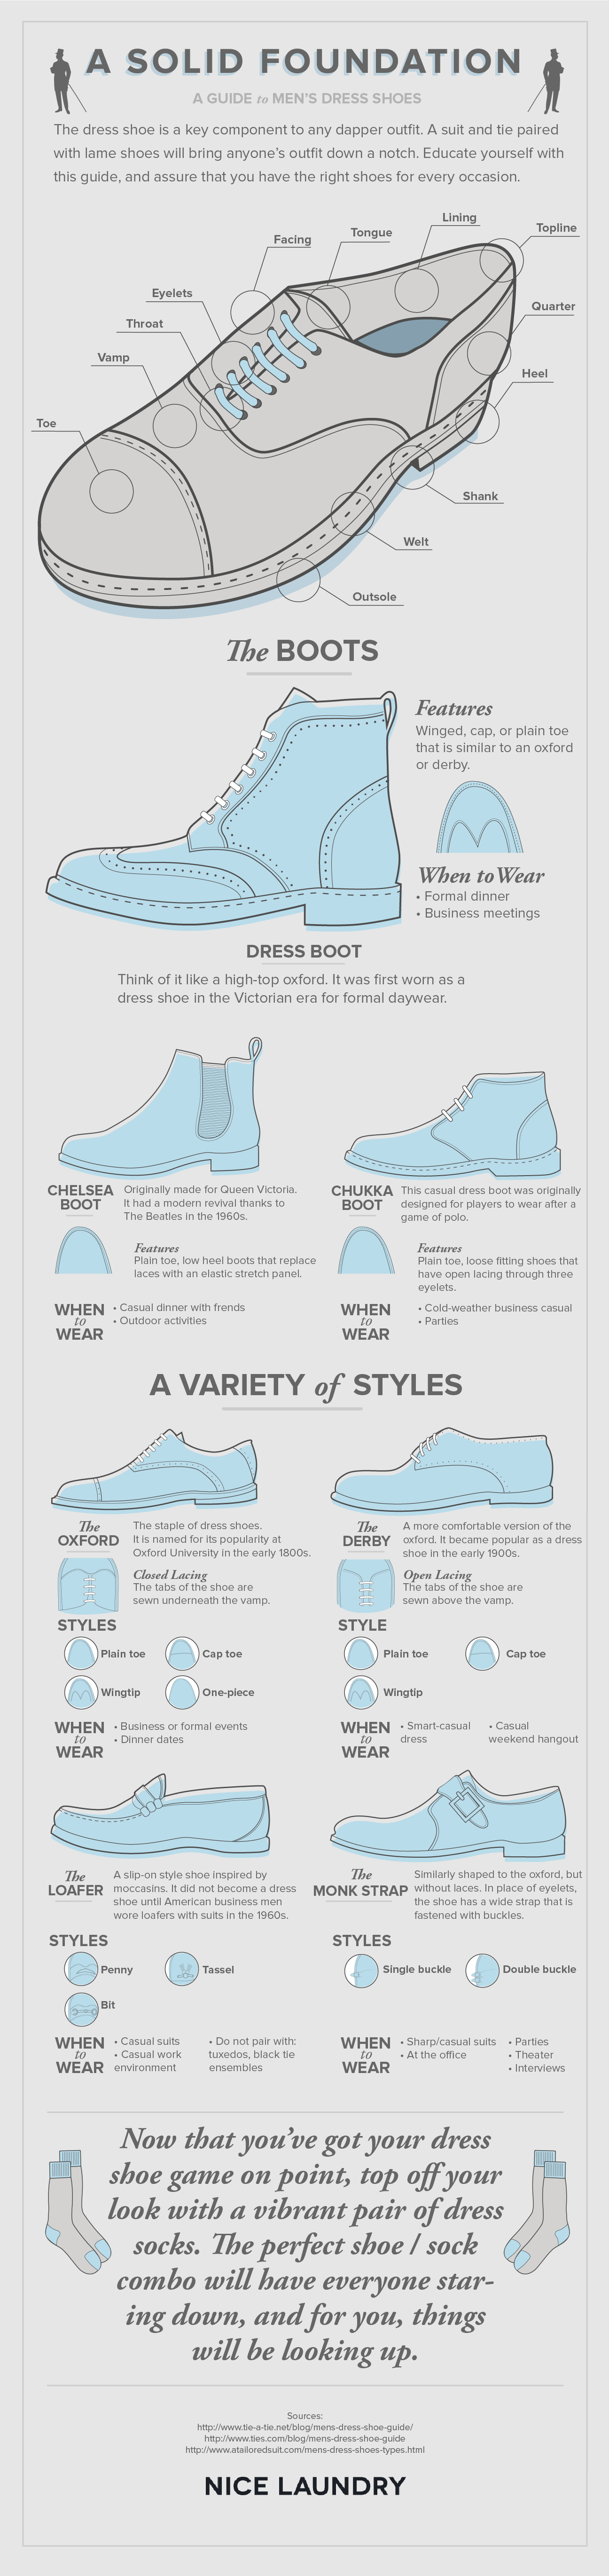 A Guide to Men's Dress Shoes